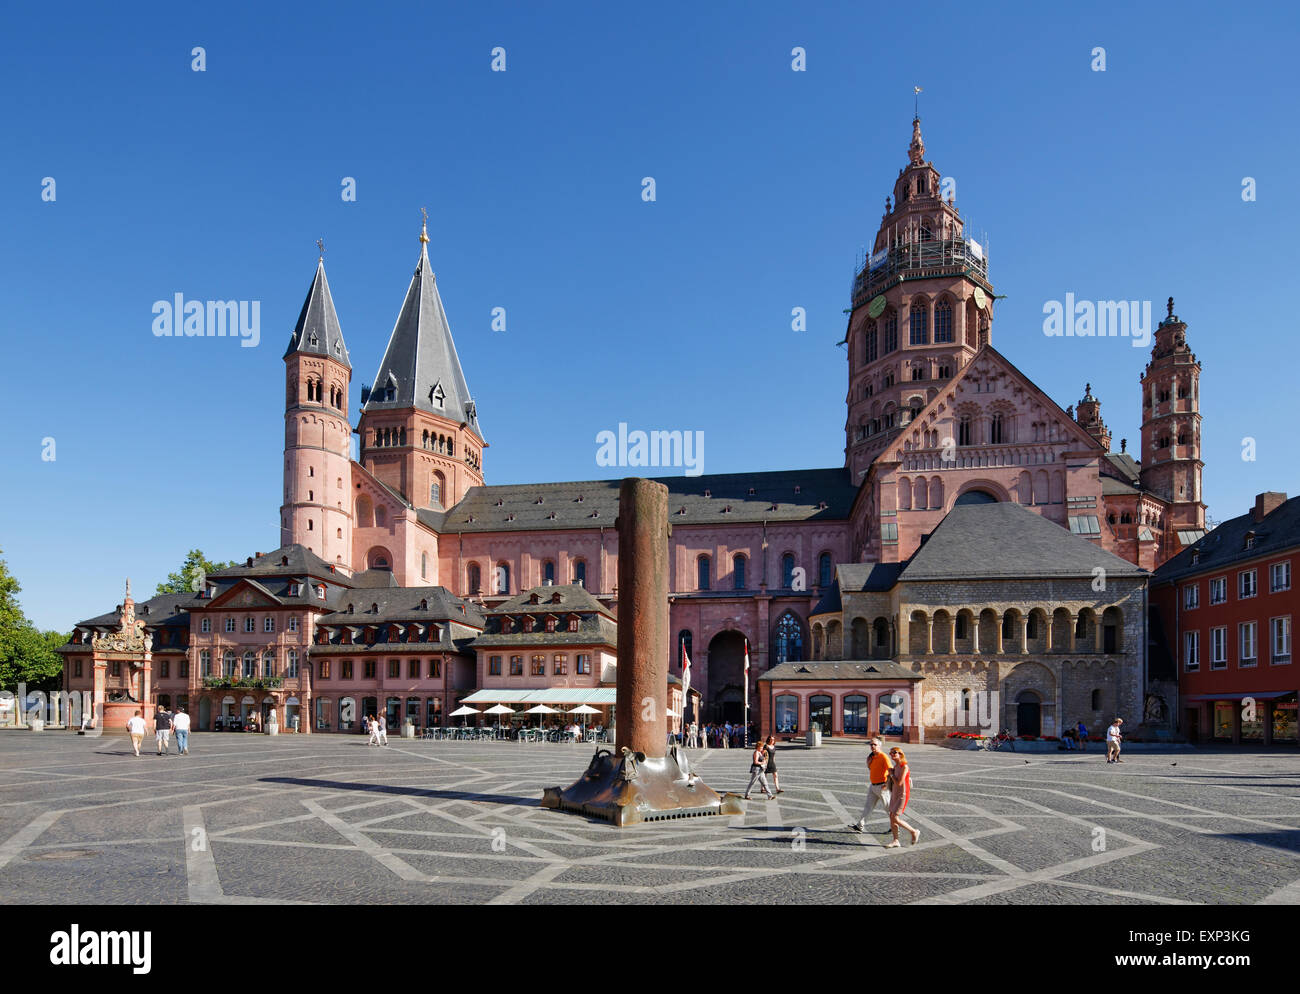 Mainz Cathedral or St. Martin's Cathedral and Heunensäule victory column, market square, Mainz, Rhineland-Palatinate, Germany Stock Photo